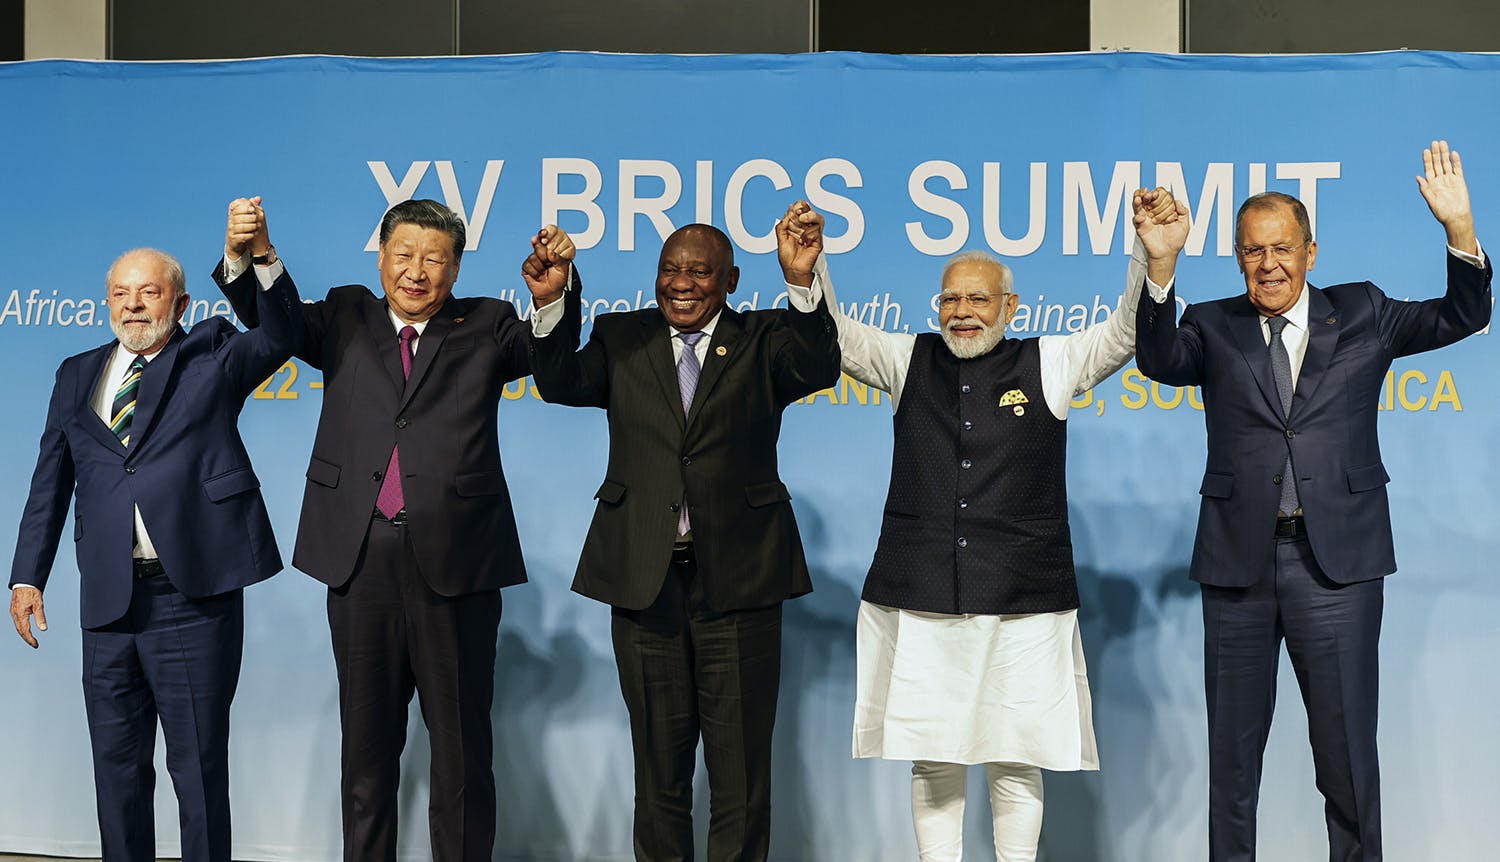 From left, Brazil's President Luiz Inacio Lula da Silva, China's President Xi Jinping, South Africa's President Cyril Ramaphosa, India's Prime Minister Narendra Modi and Russia's Foreign Minister Sergei Lavrov pose for a BRICS group photo during the 2023 BRICS Summit at the Sandton Convention Center in Johannesburg, South Africa, Wednesday, Aug. 23, 2023. (Gianluigi Guercia/Pool via AP)